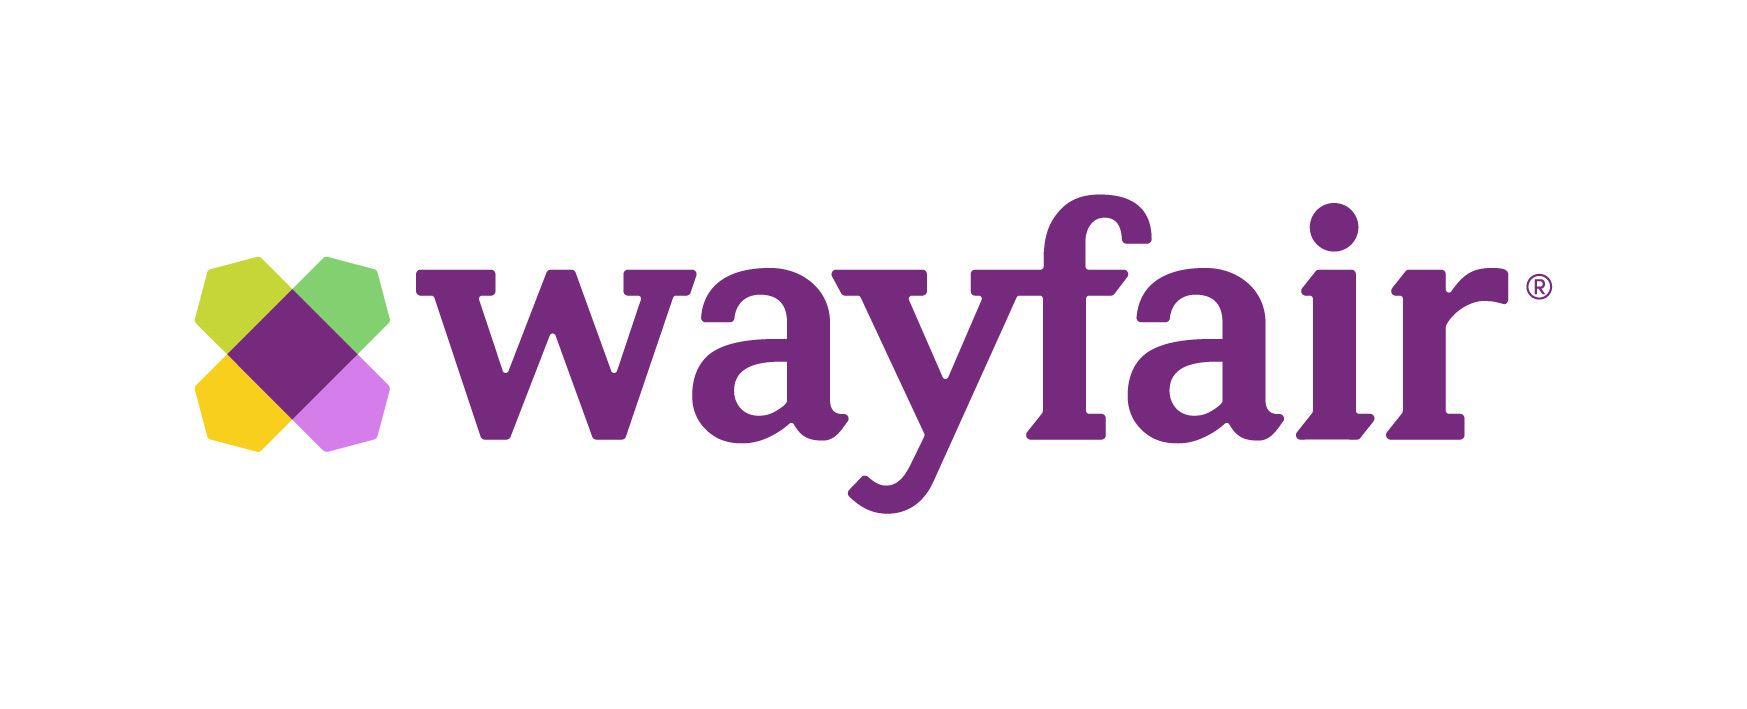 Popular Purple Logo - Wayfair Reports 52% Increase in Direct Retail Sales for Holiday